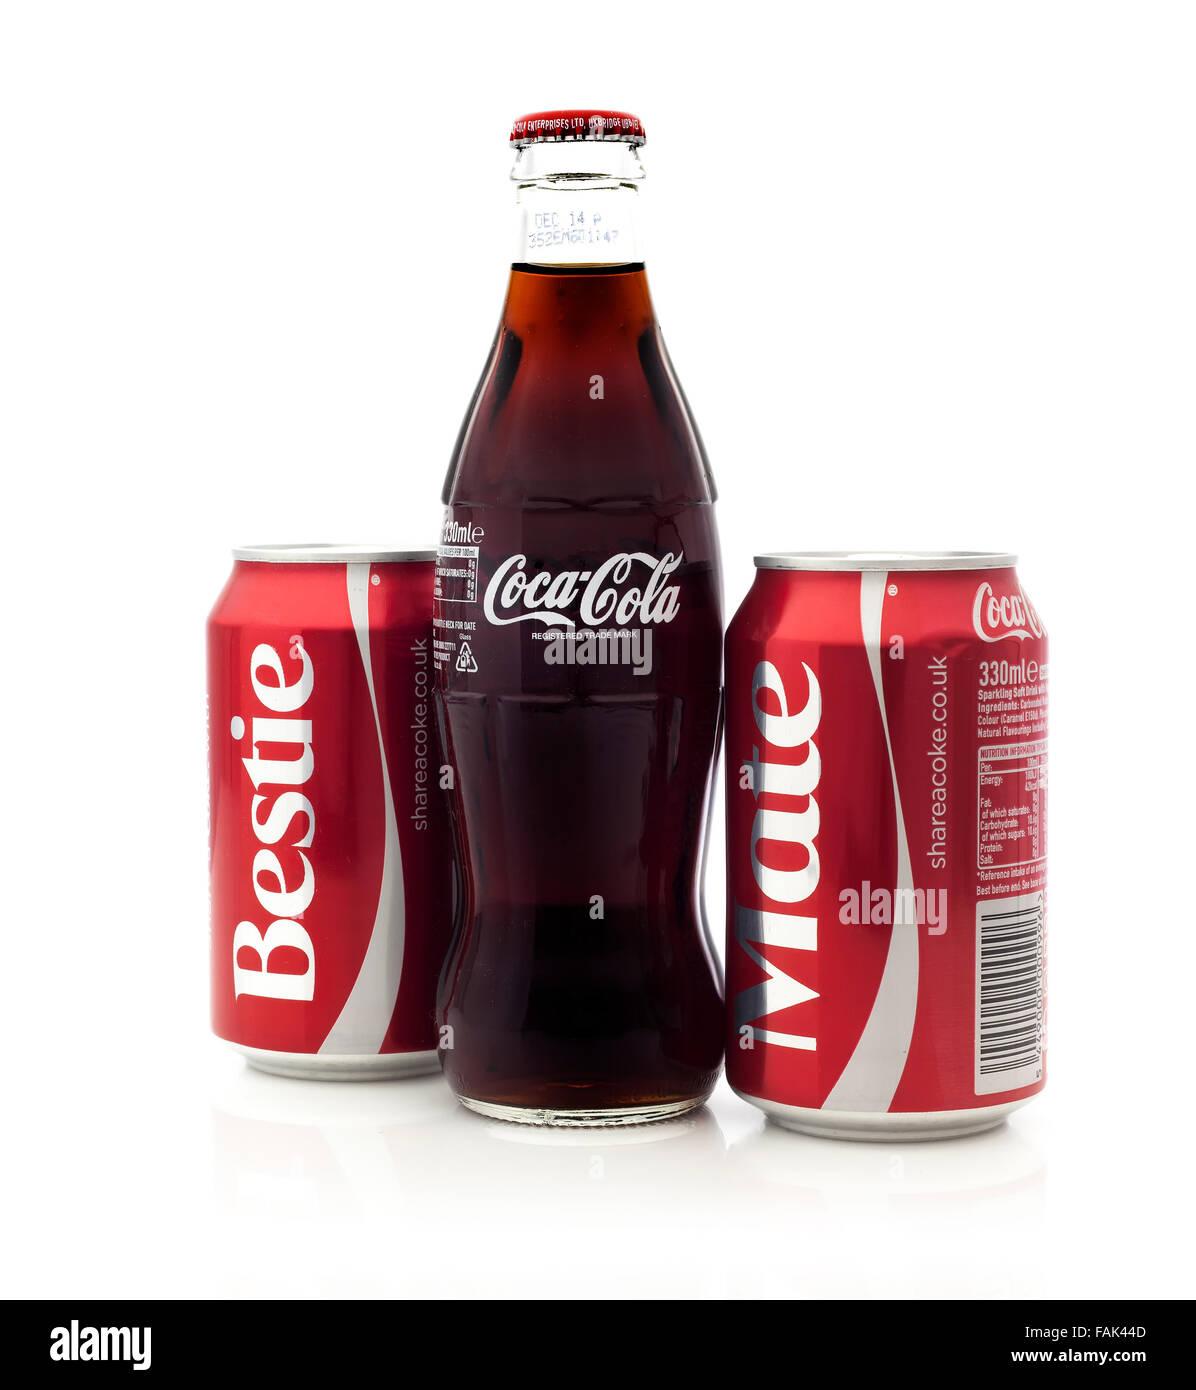 https://c8.alamy.com/comp/FAK44D/cans-of-coca-cola-share-a-coke-with-dude-and-mate-with-a-classic-coke-FAK44D.jpg